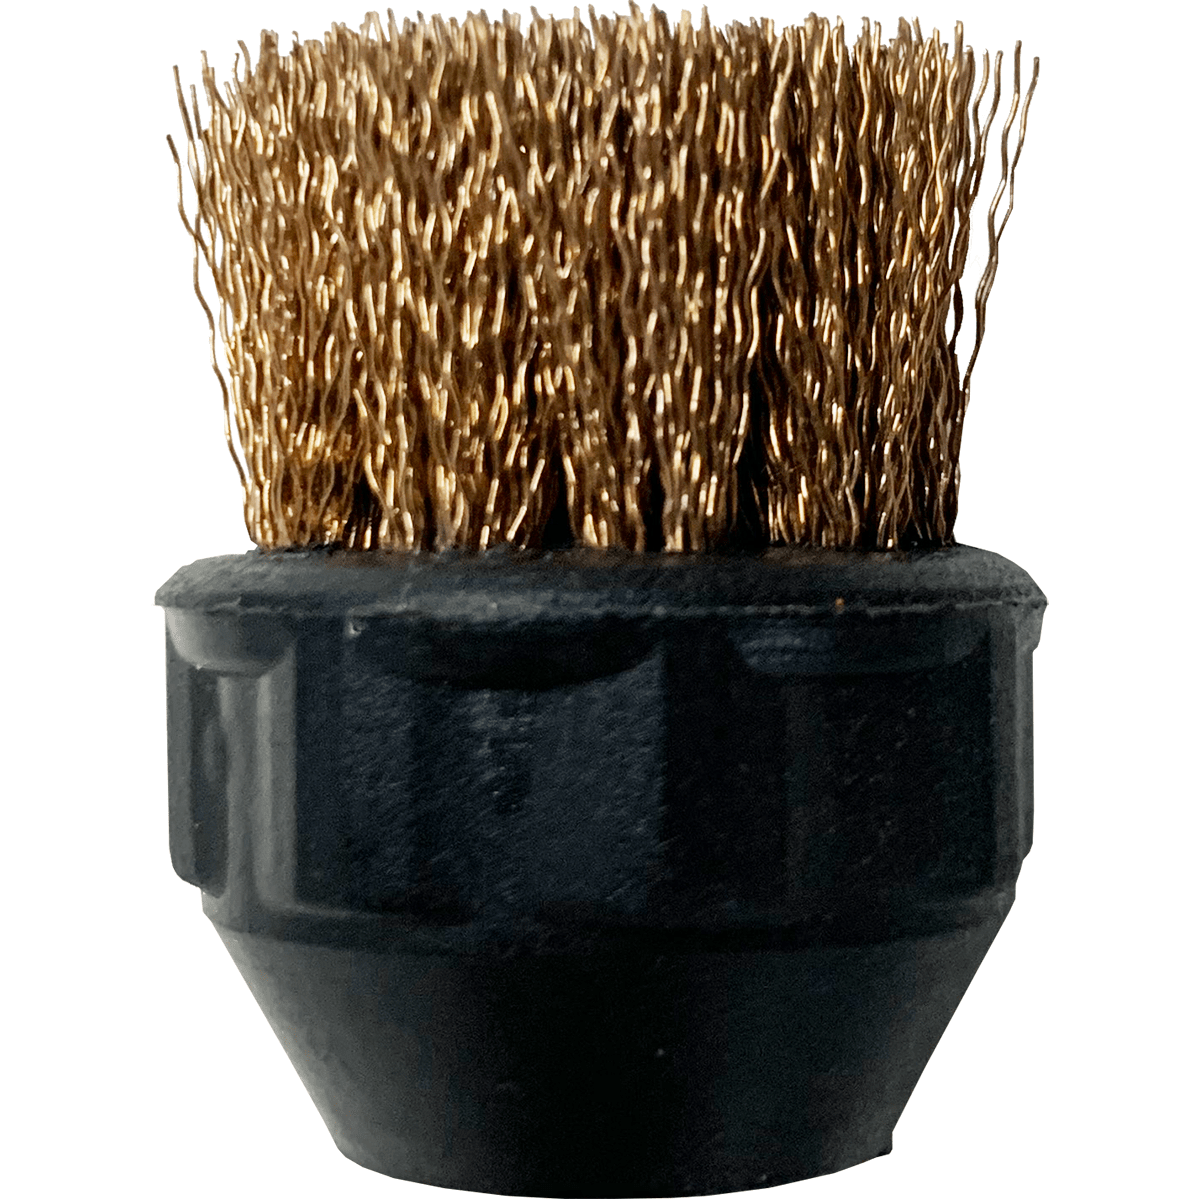 Reliable 30mm Brass Brush for Tandem Pro